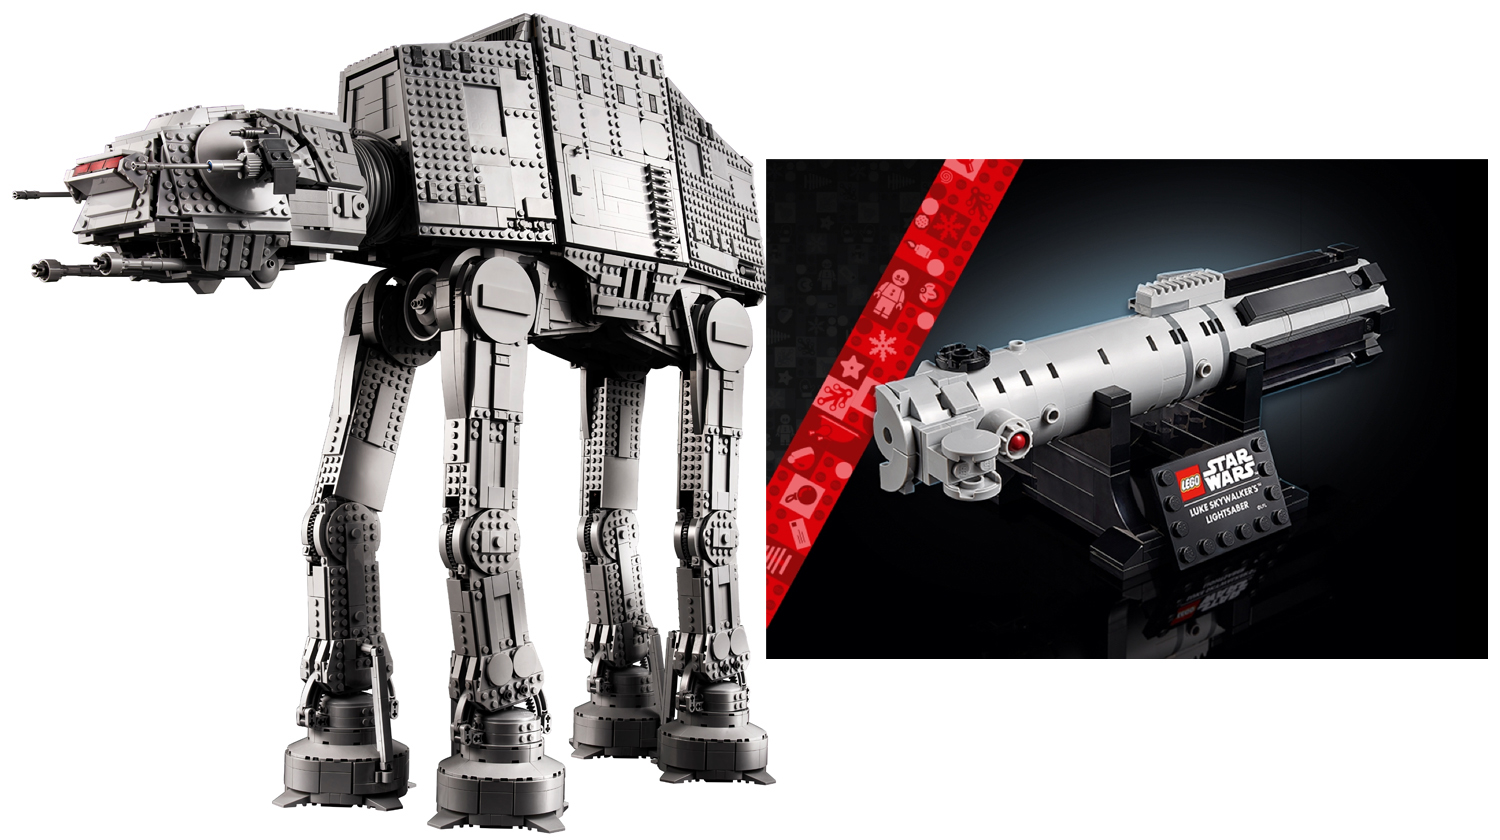 Lego's epic Star Wars comes a free Luke lightsaber on Black Friday Space